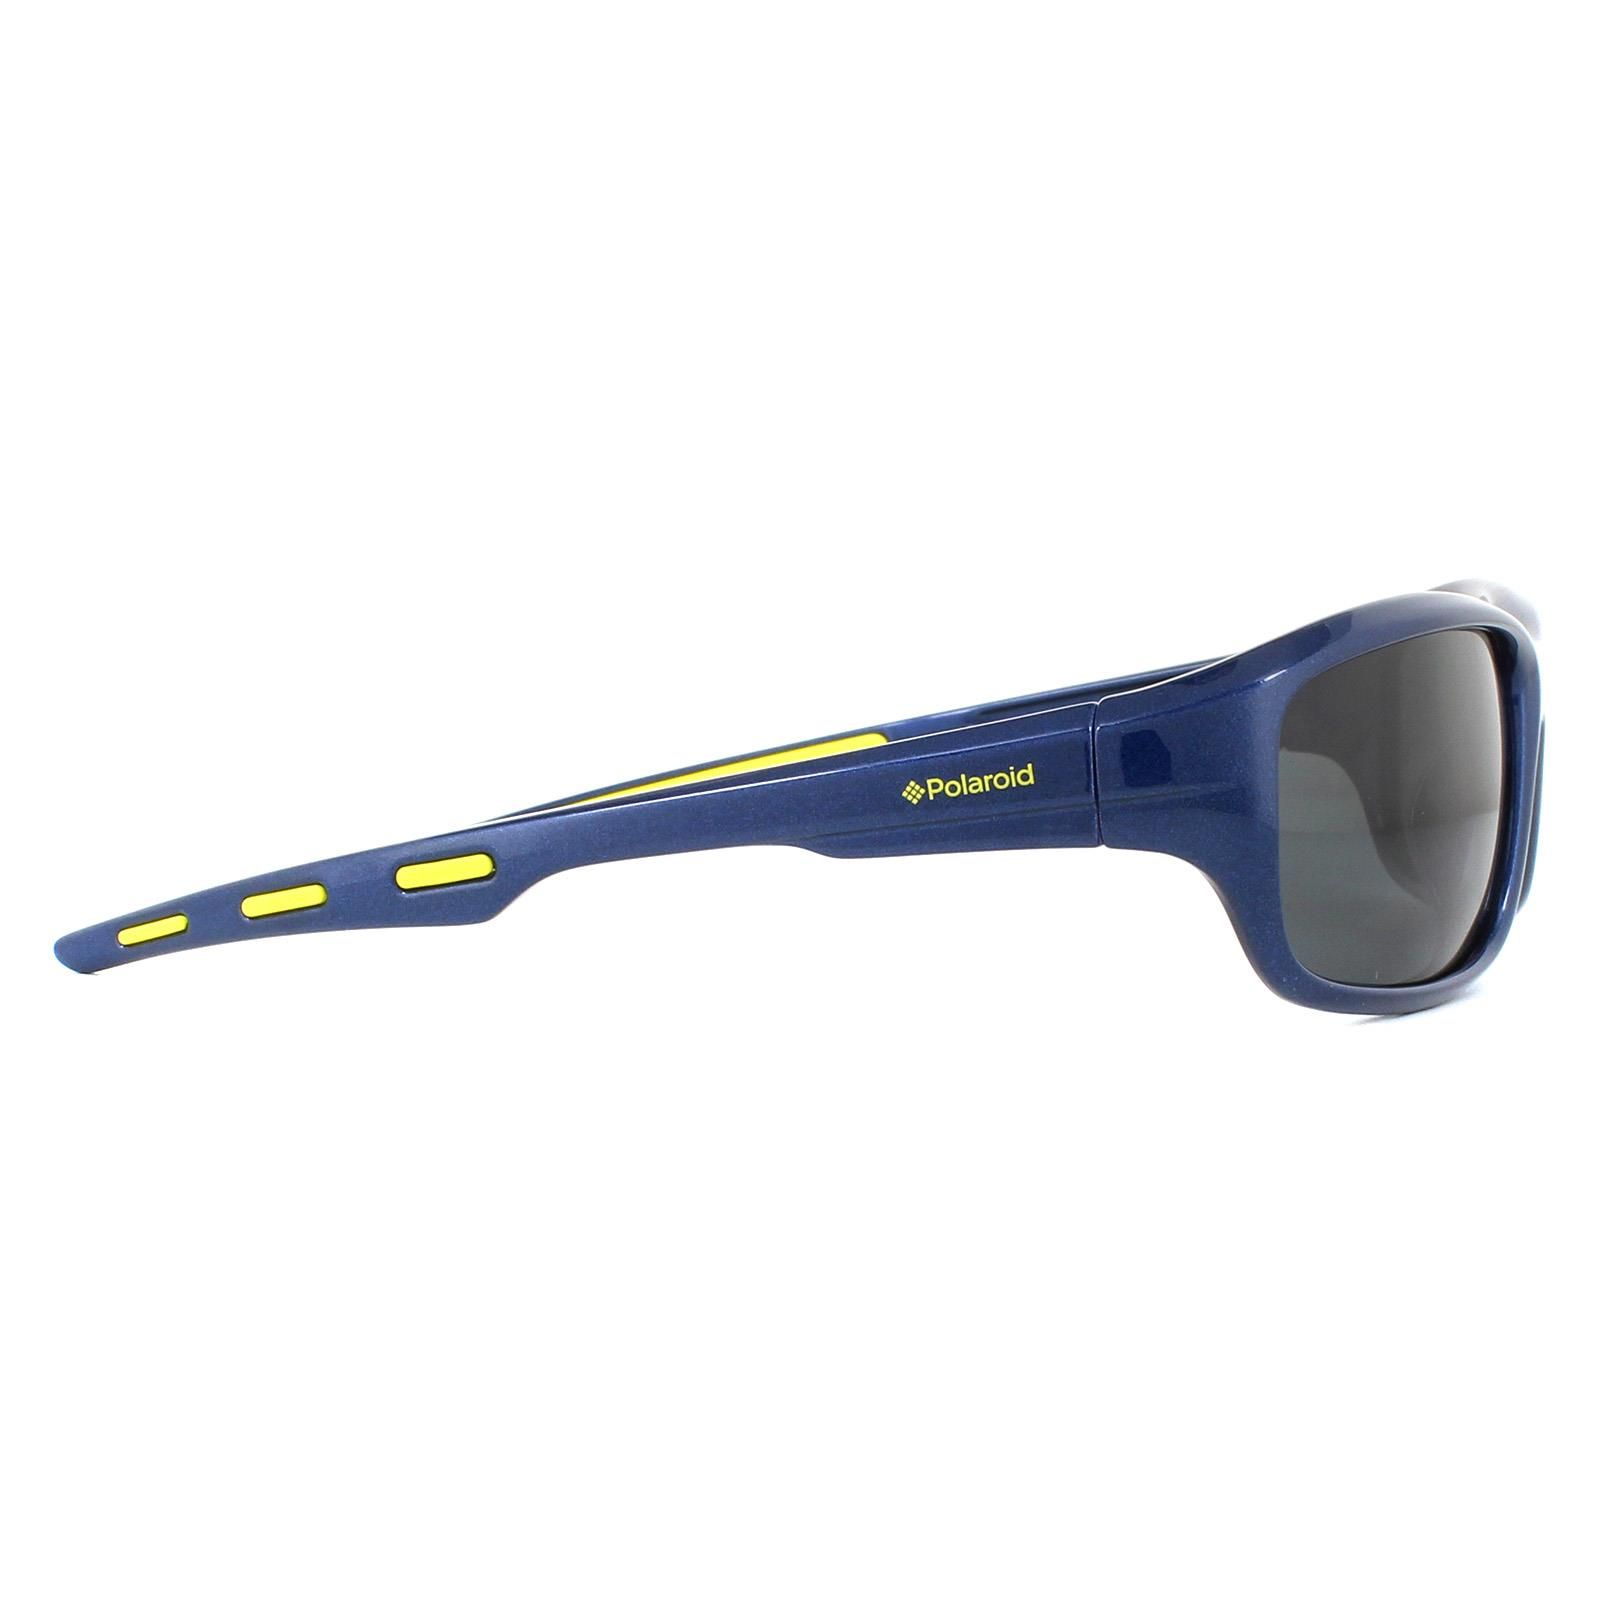 Polaroid Kids Sunglasses P0425 KEA Y2 Blue Lime Grey Polarizedare a great wrap-around style for kids with some nice colour accents along the temples and Polaroid logo.